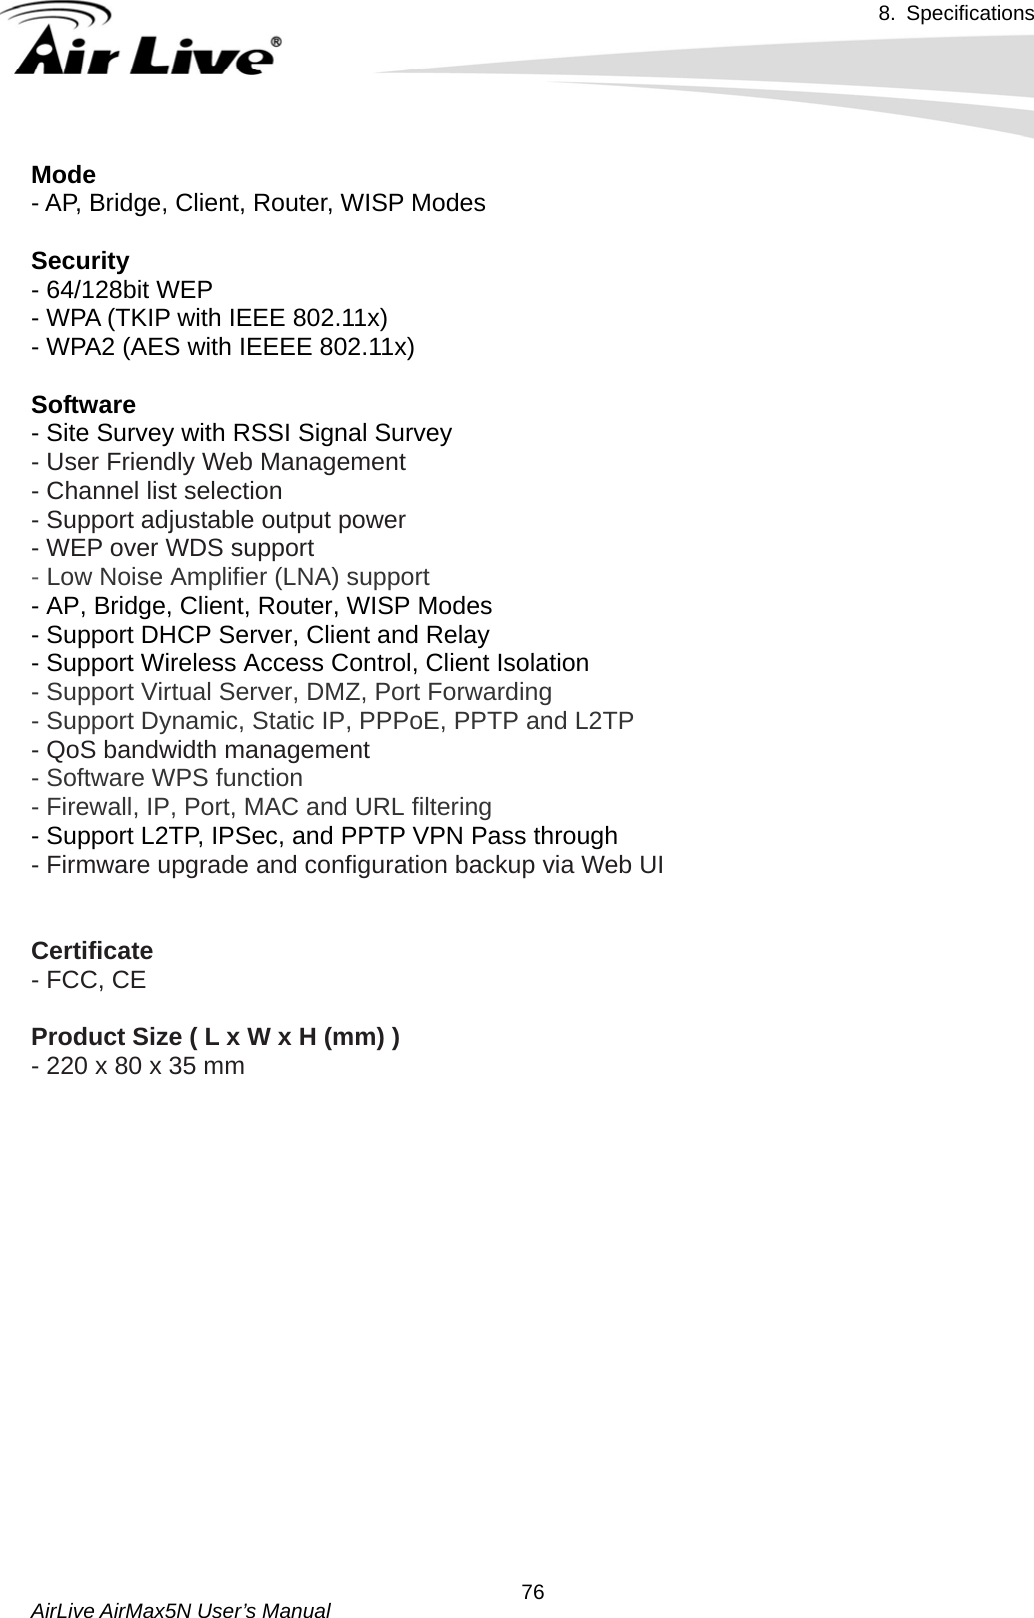 8. Specifications       AirLive AirMax5N User’s Manual  76Mode - AP, Bridge, Client, Router, WISP Modes    Security - 64/128bit WEP - WPA (TKIP with IEEE 802.11x) - WPA2 (AES with IEEEE 802.11x)  Software - Site Survey with RSSI Signal Survey - User Friendly Web Management - Channel list selection - Support adjustable output power - WEP over WDS support - Low Noise Amplifier (LNA) support - AP, Bridge, Client, Router, WISP Modes - Support DHCP Server, Client and Relay - Support Wireless Access Control, Client Isolation   - Support Virtual Server, DMZ, Port Forwarding - Support Dynamic, Static IP, PPPoE, PPTP and L2TP  - QoS bandwidth management - Software WPS function - Firewall, IP, Port, MAC and URL filtering - Support L2TP, IPSec, and PPTP VPN Pass through   - Firmware upgrade and configuration backup via Web UI    Certificate - FCC, CE  Product Size ( L x W x H (mm) ) - 220 x 80 x 35 mm   